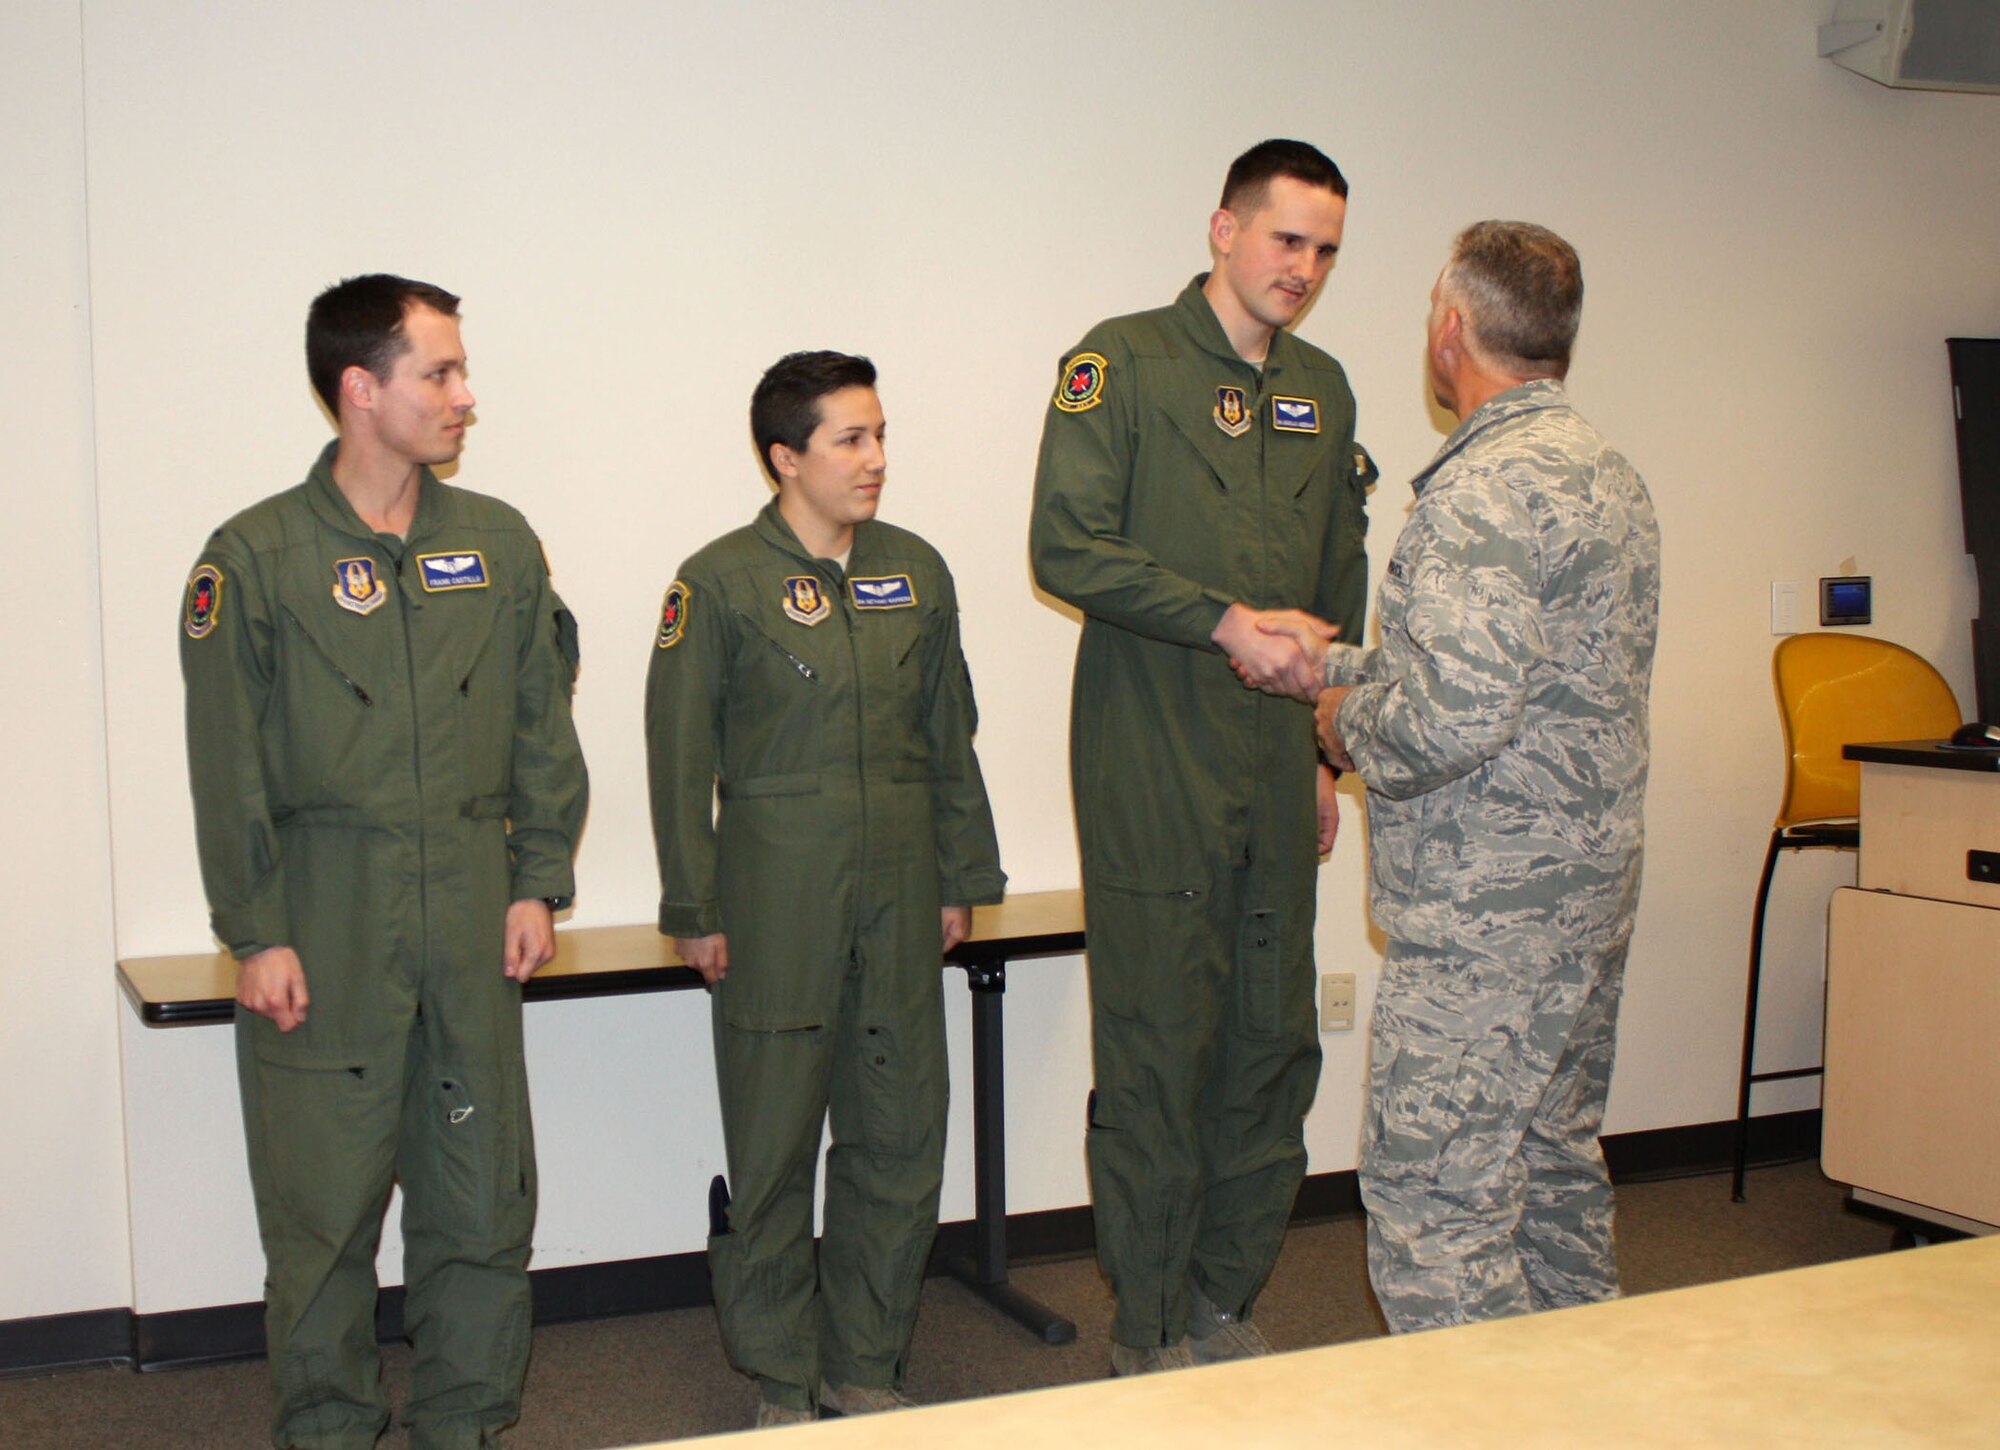 TRAVIS AIR FORCE BASE, Calif. --1st Lt. Frank Castillo, and Senior Airman Bethany Marrero, stand next to Senior Airman Nicholas Andermahr as he shakes the hand of Brig. Gen. John Flournoy, 4th Air Force commander, on March 8. All three members, who are part of the 349th Aeromedical Evacuation Squadron, were congratulated and coined by Flournoy for their dedicated patient care and overall work ethic. (U.S. Air Force photo/Senior Airman Cindy G. Alejandrez)